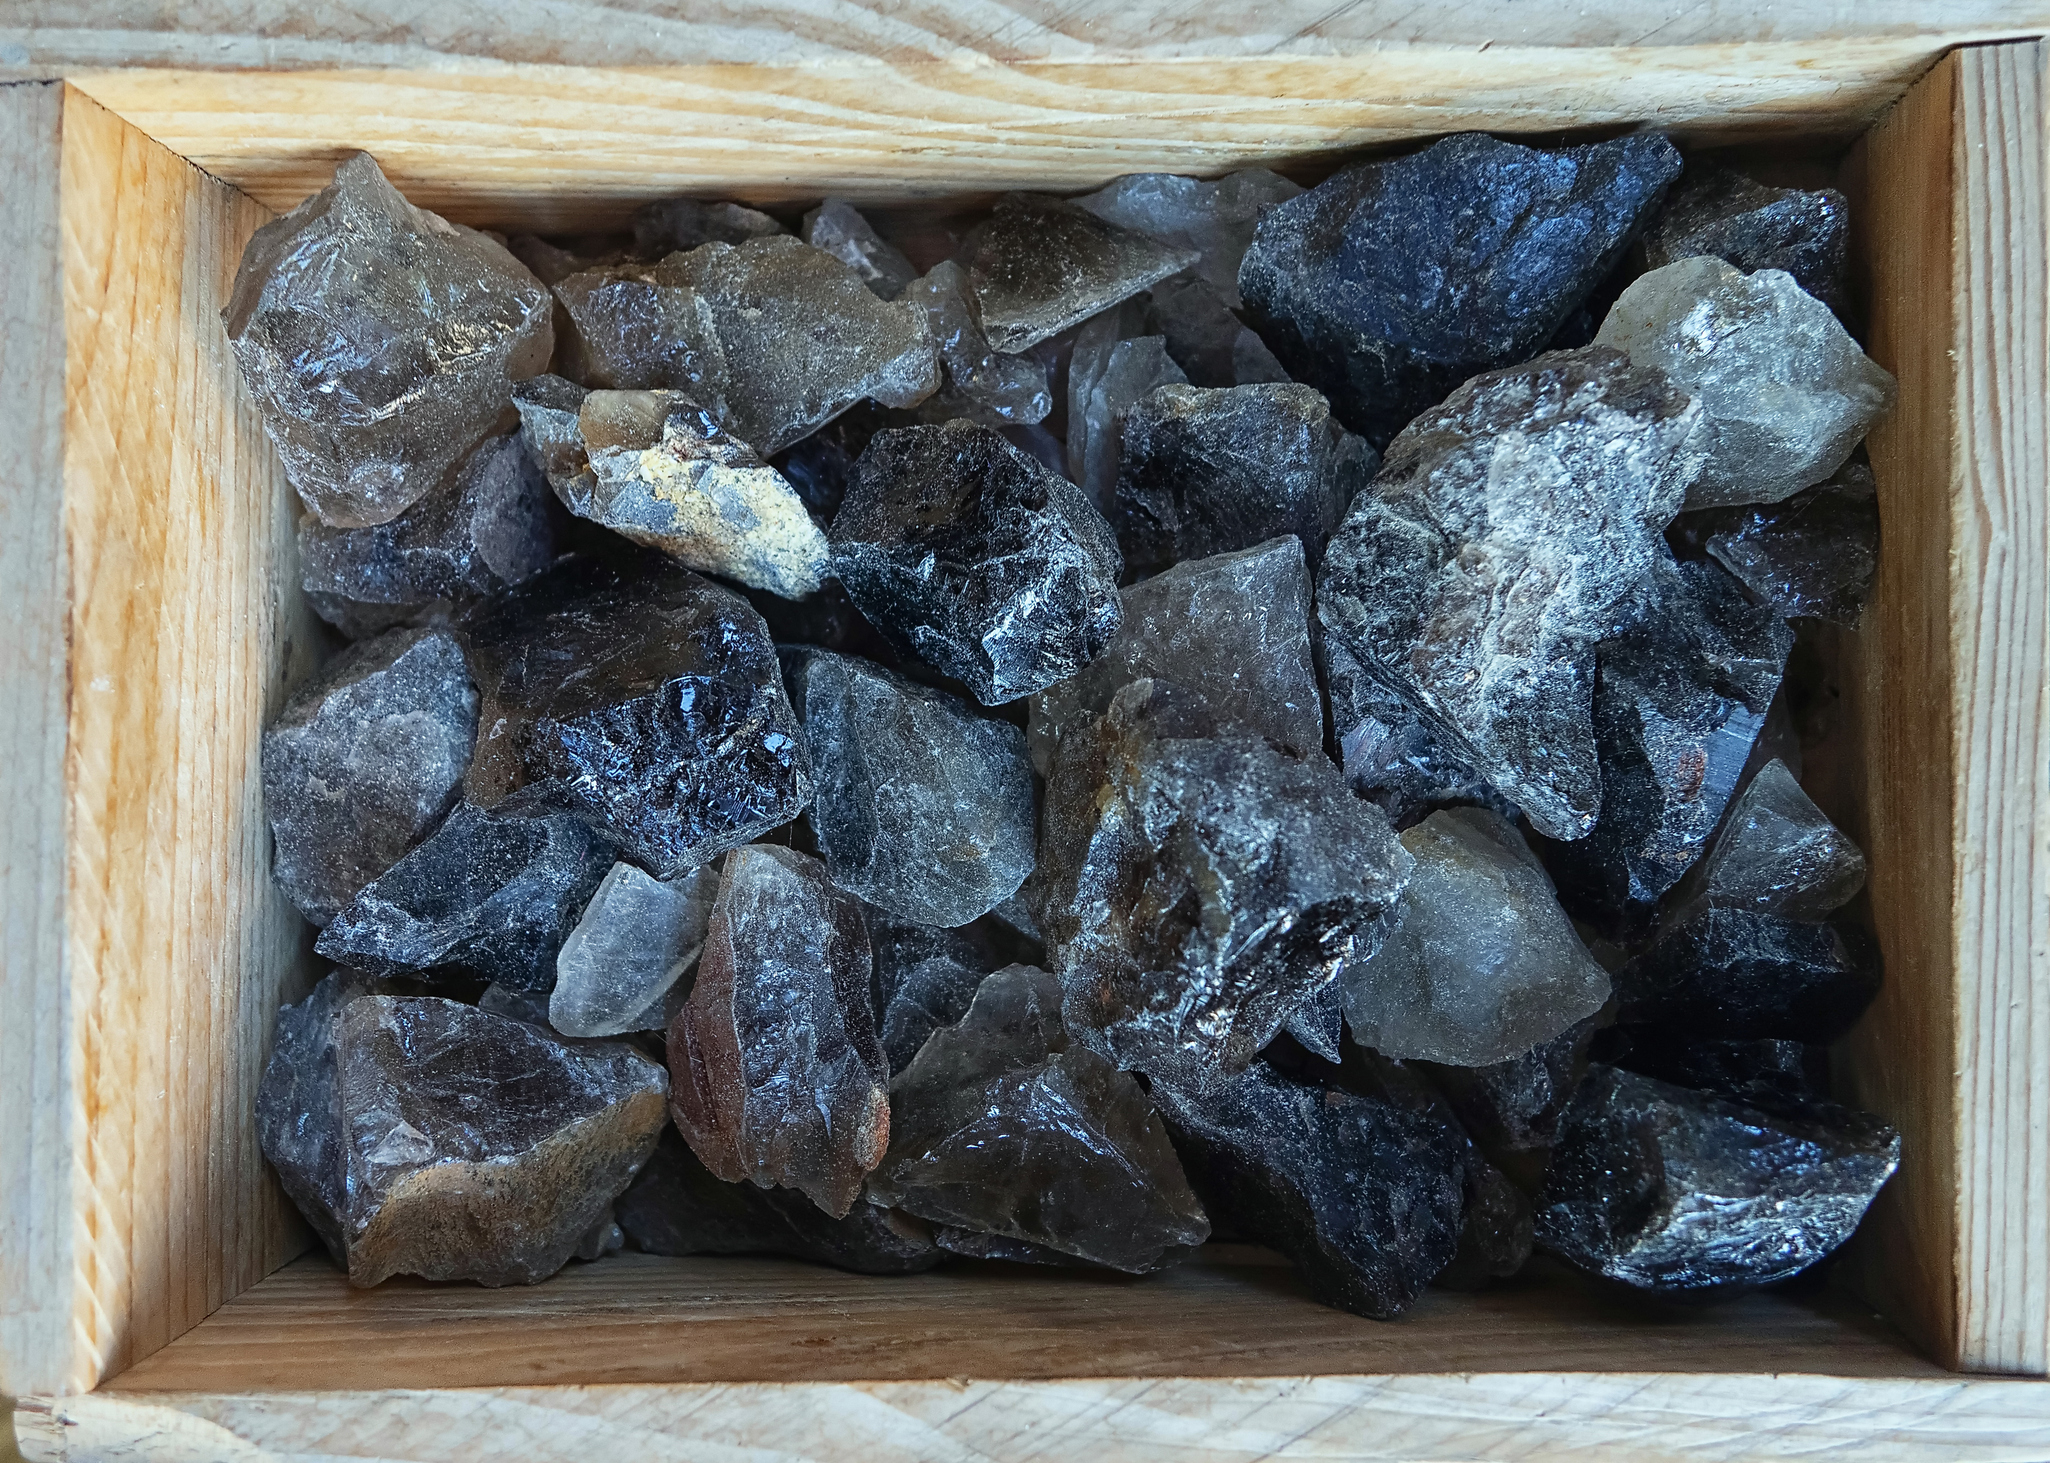 A wooden tray filled with various pieces of raw smoky quartz crystals